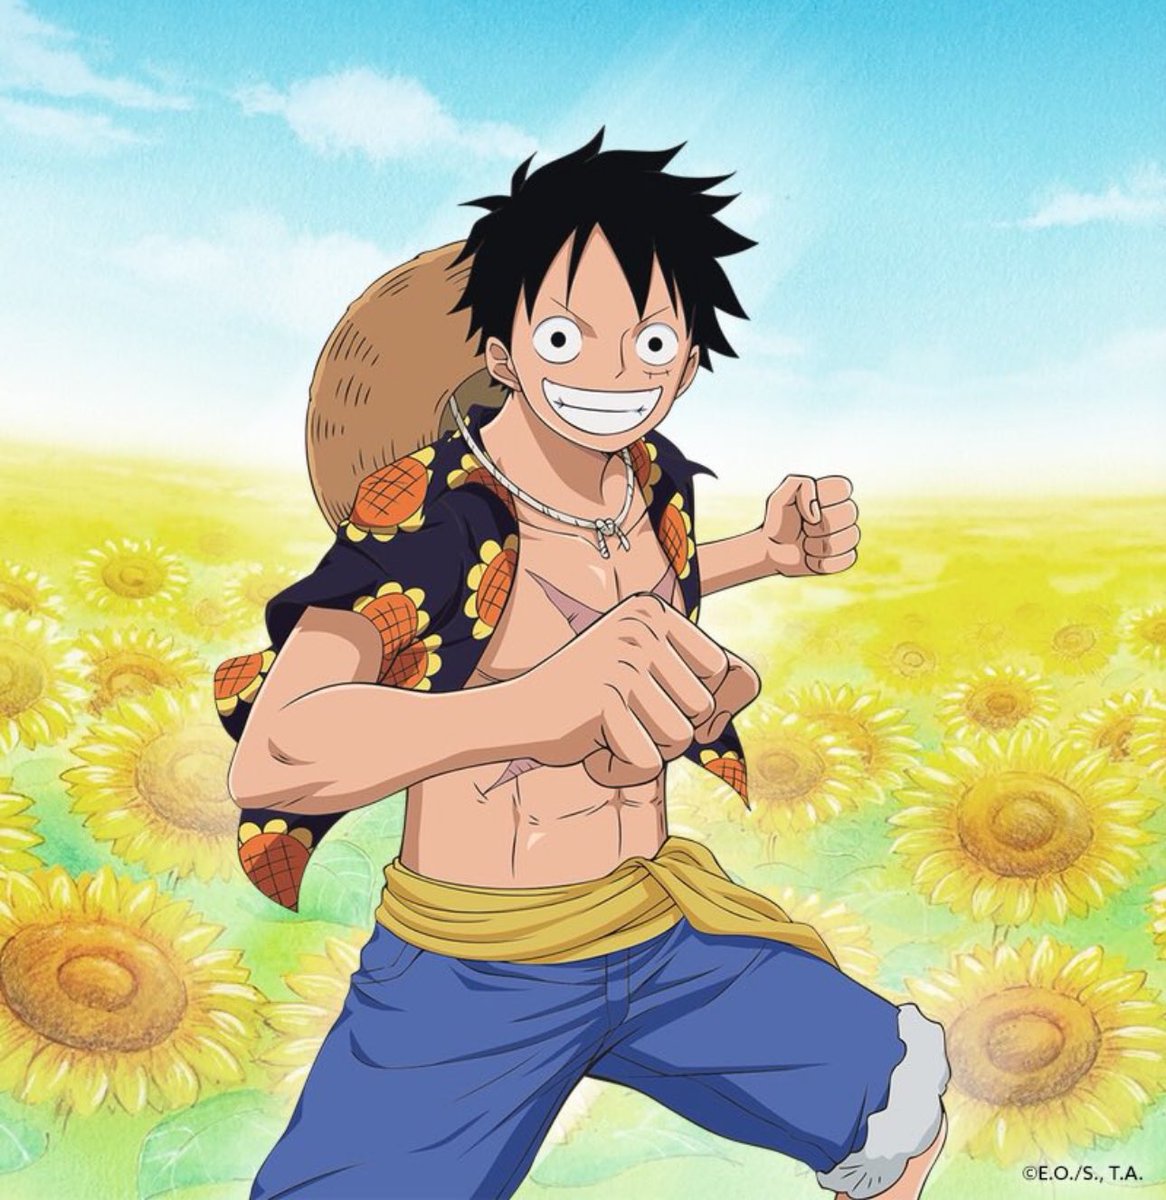 I want to make such a sunflower cake for Luffy 🌻🌻🌻